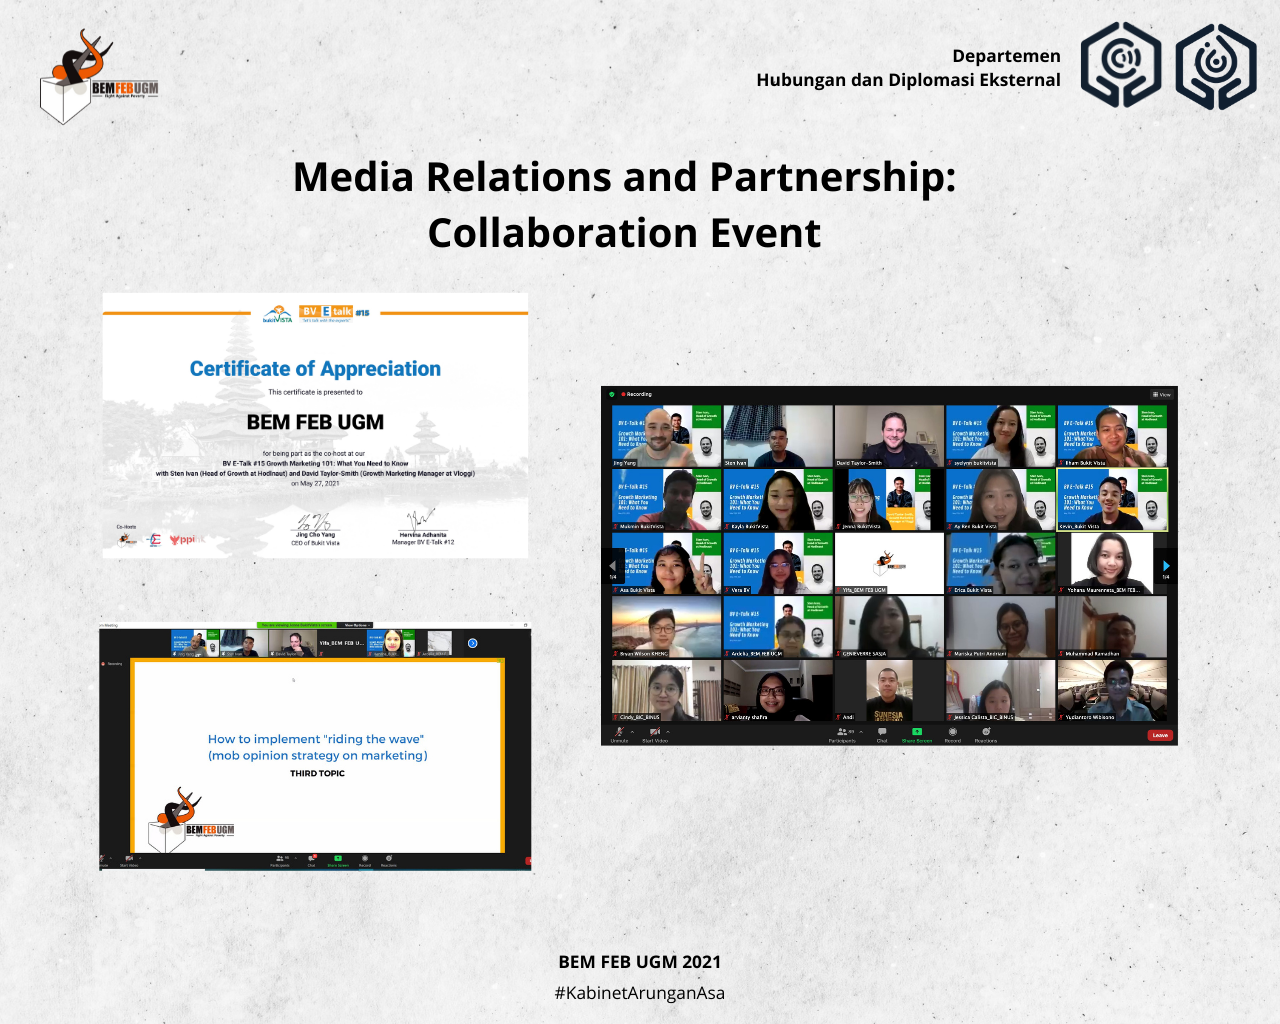 2. Media Relations and Partnership Collaboration Event BV E-talk#15